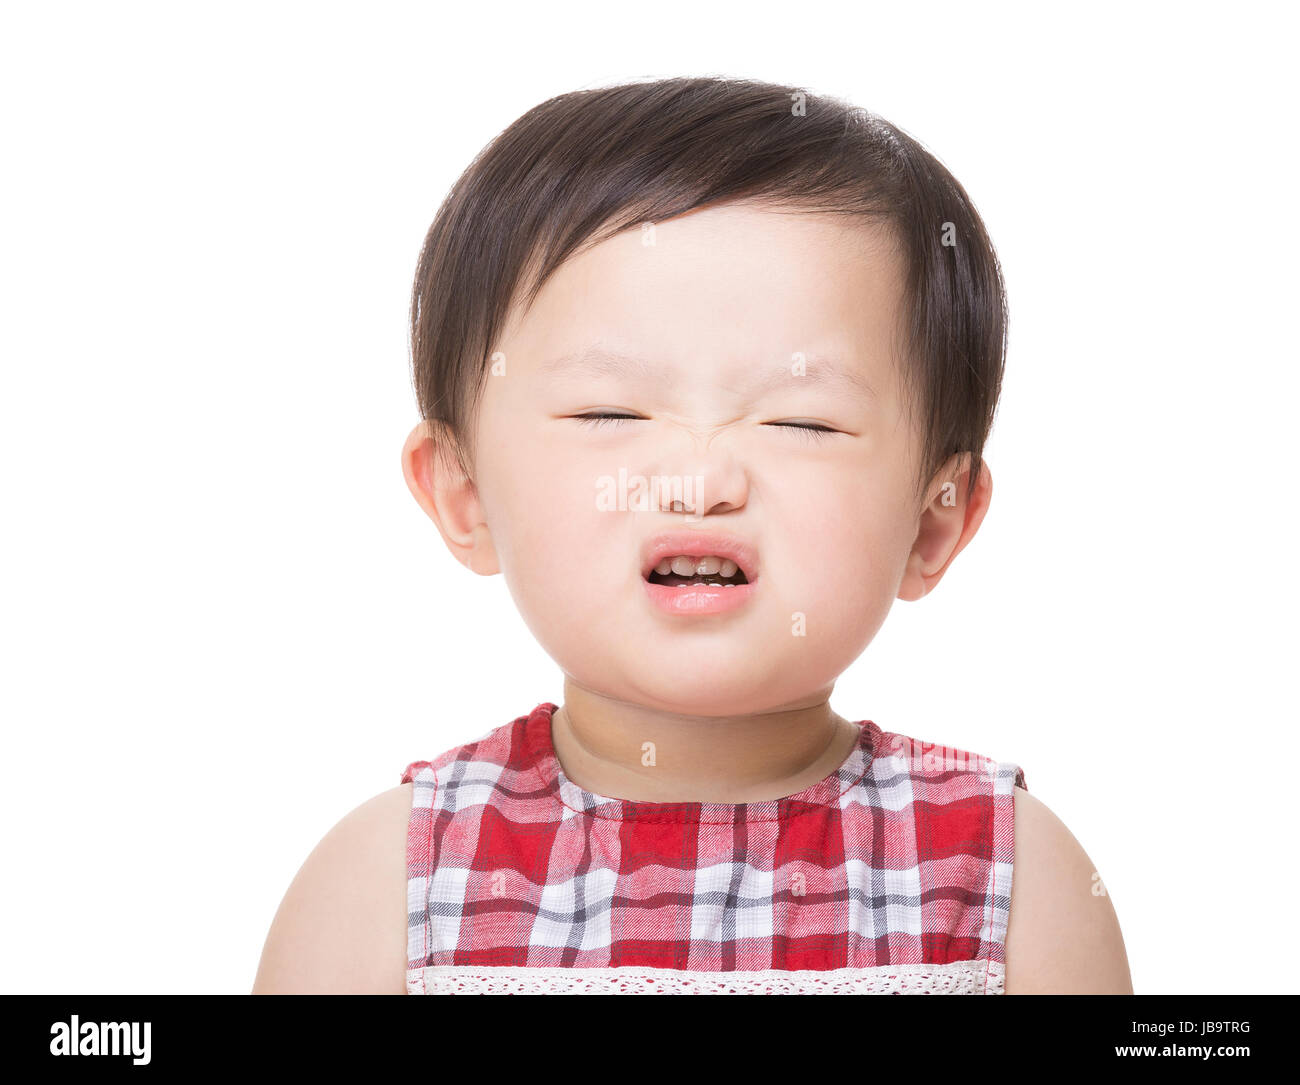 Baby making funny face Stock Photo